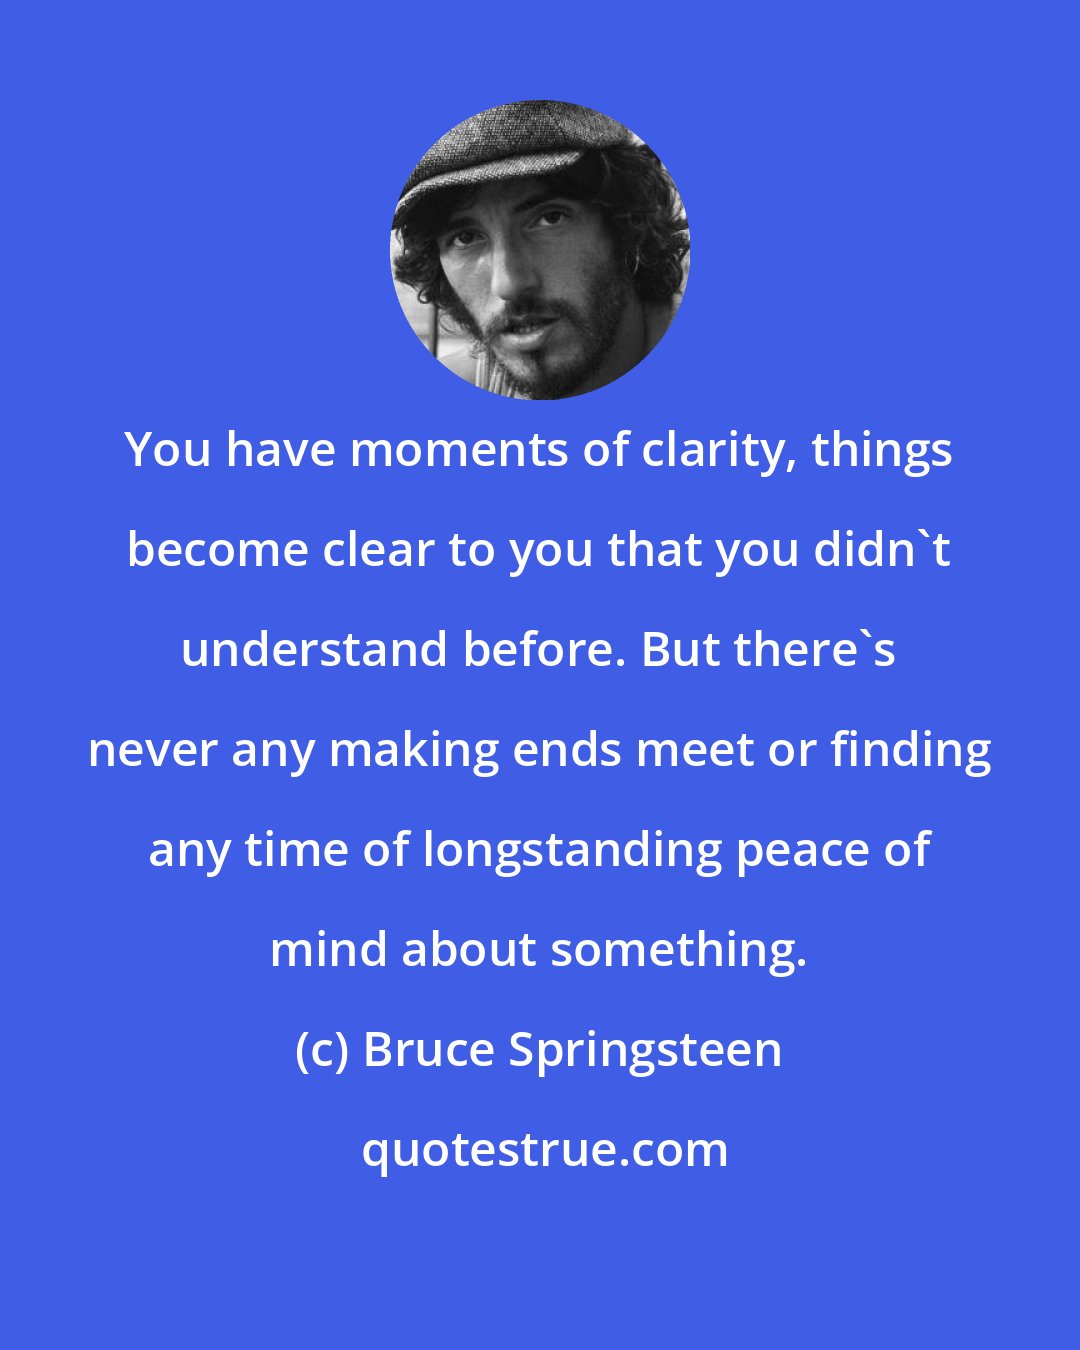 Bruce Springsteen: You have moments of clarity, things become clear to you that you didn't understand before. But there's never any making ends meet or finding any time of longstanding peace of mind about something.